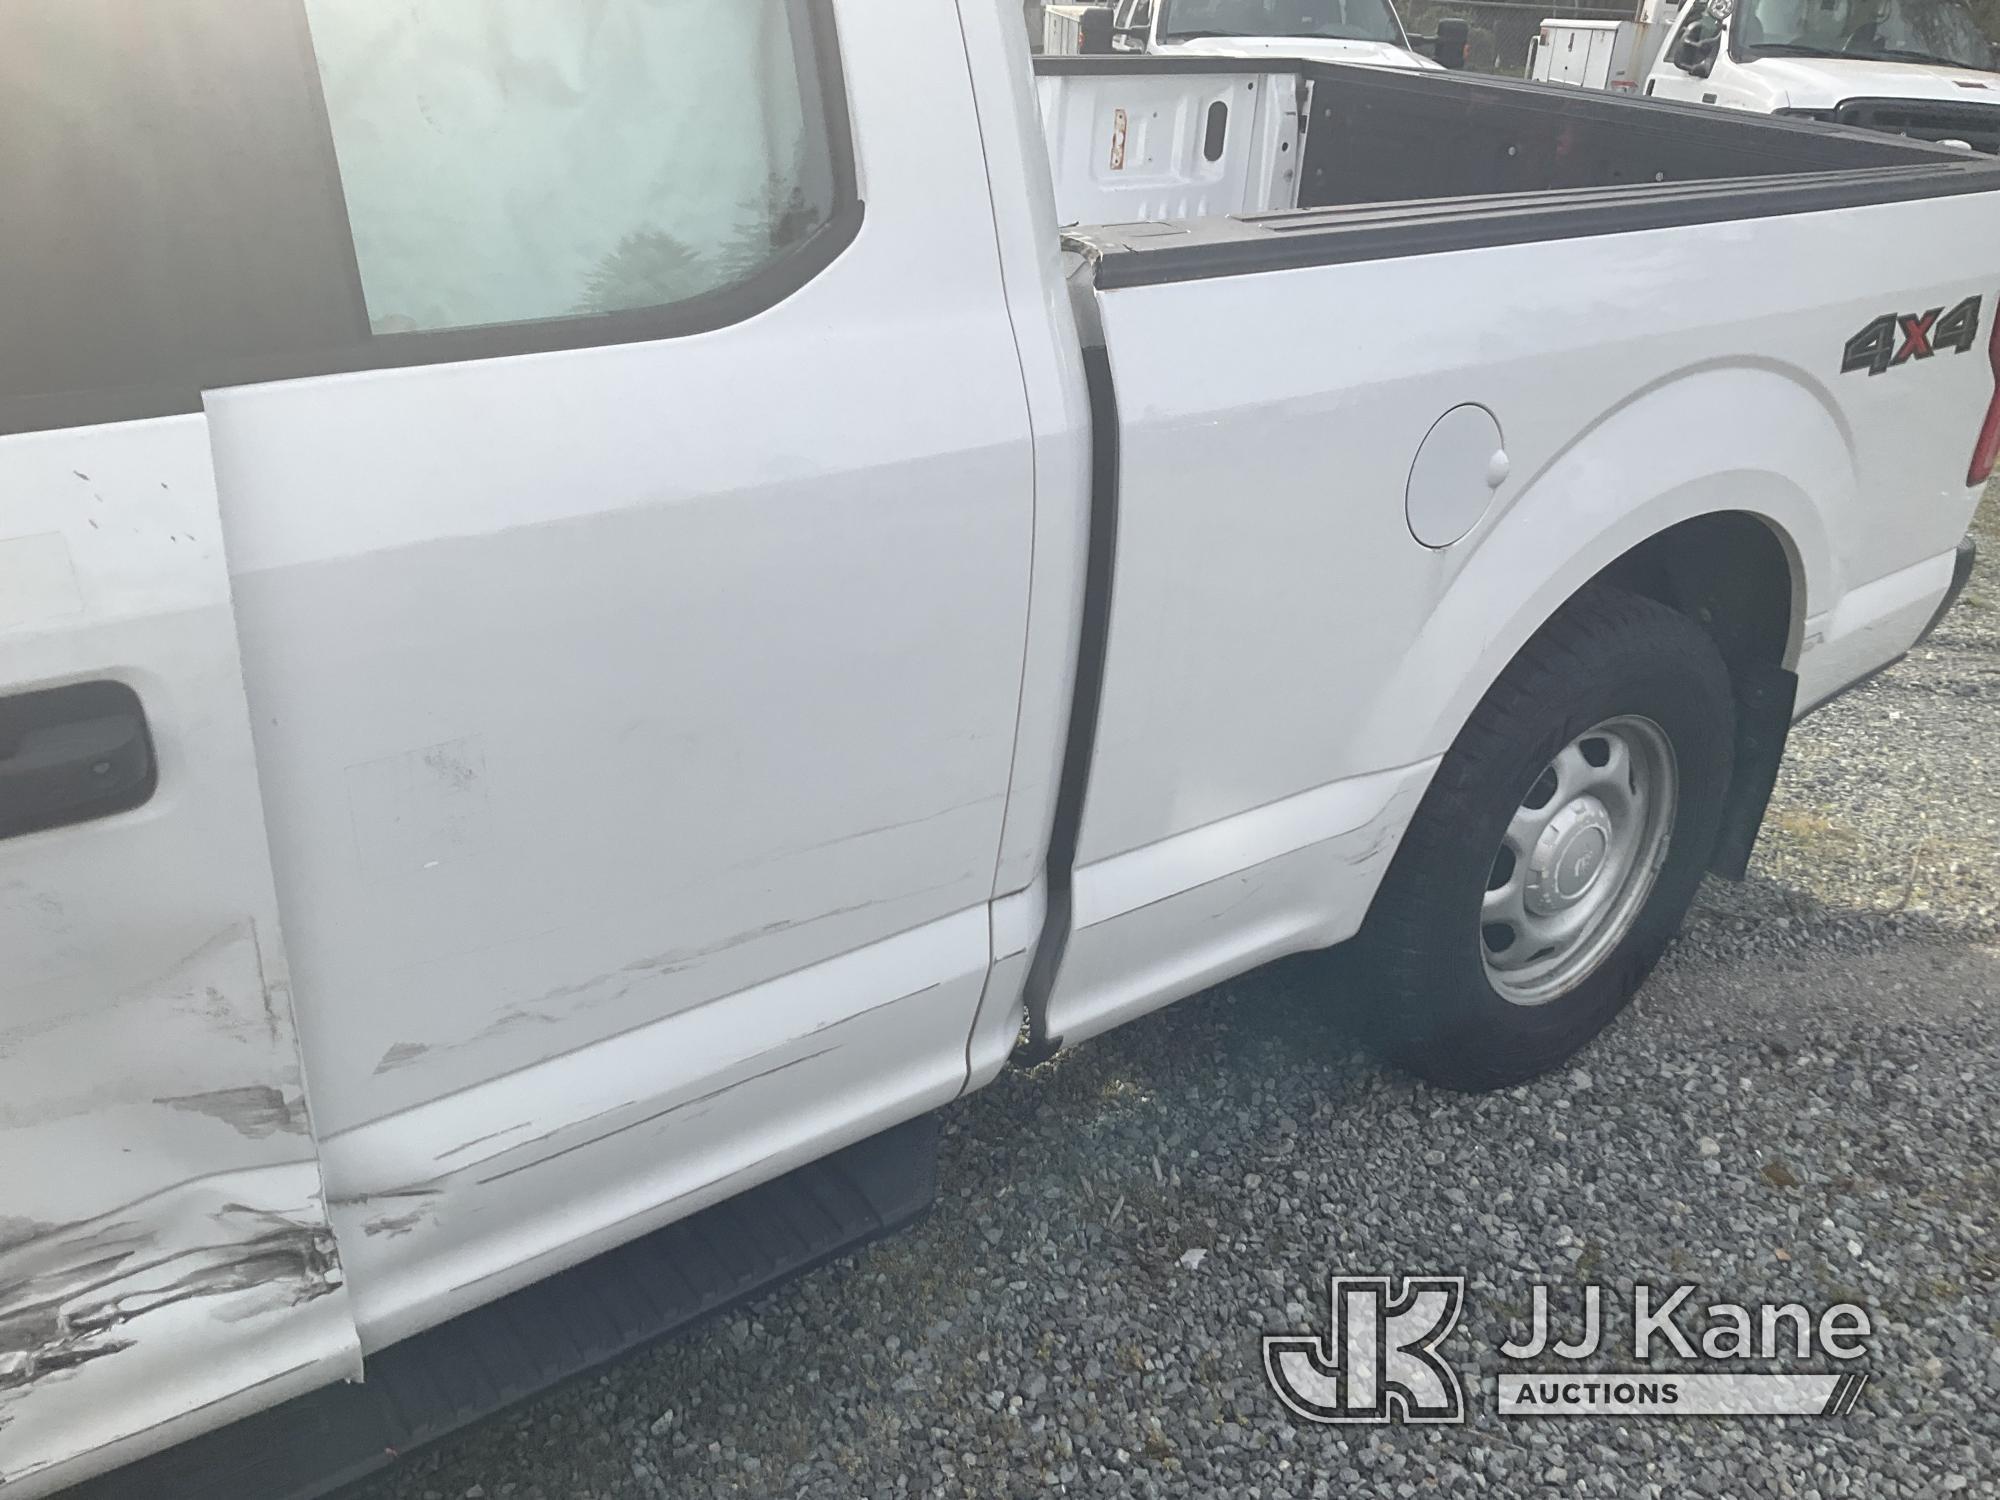 (Eatonville, WA) 2016 Ford F150 4x4 Extended-Cab Pickup Truck Not Running, Condition Unknown, Wrecke